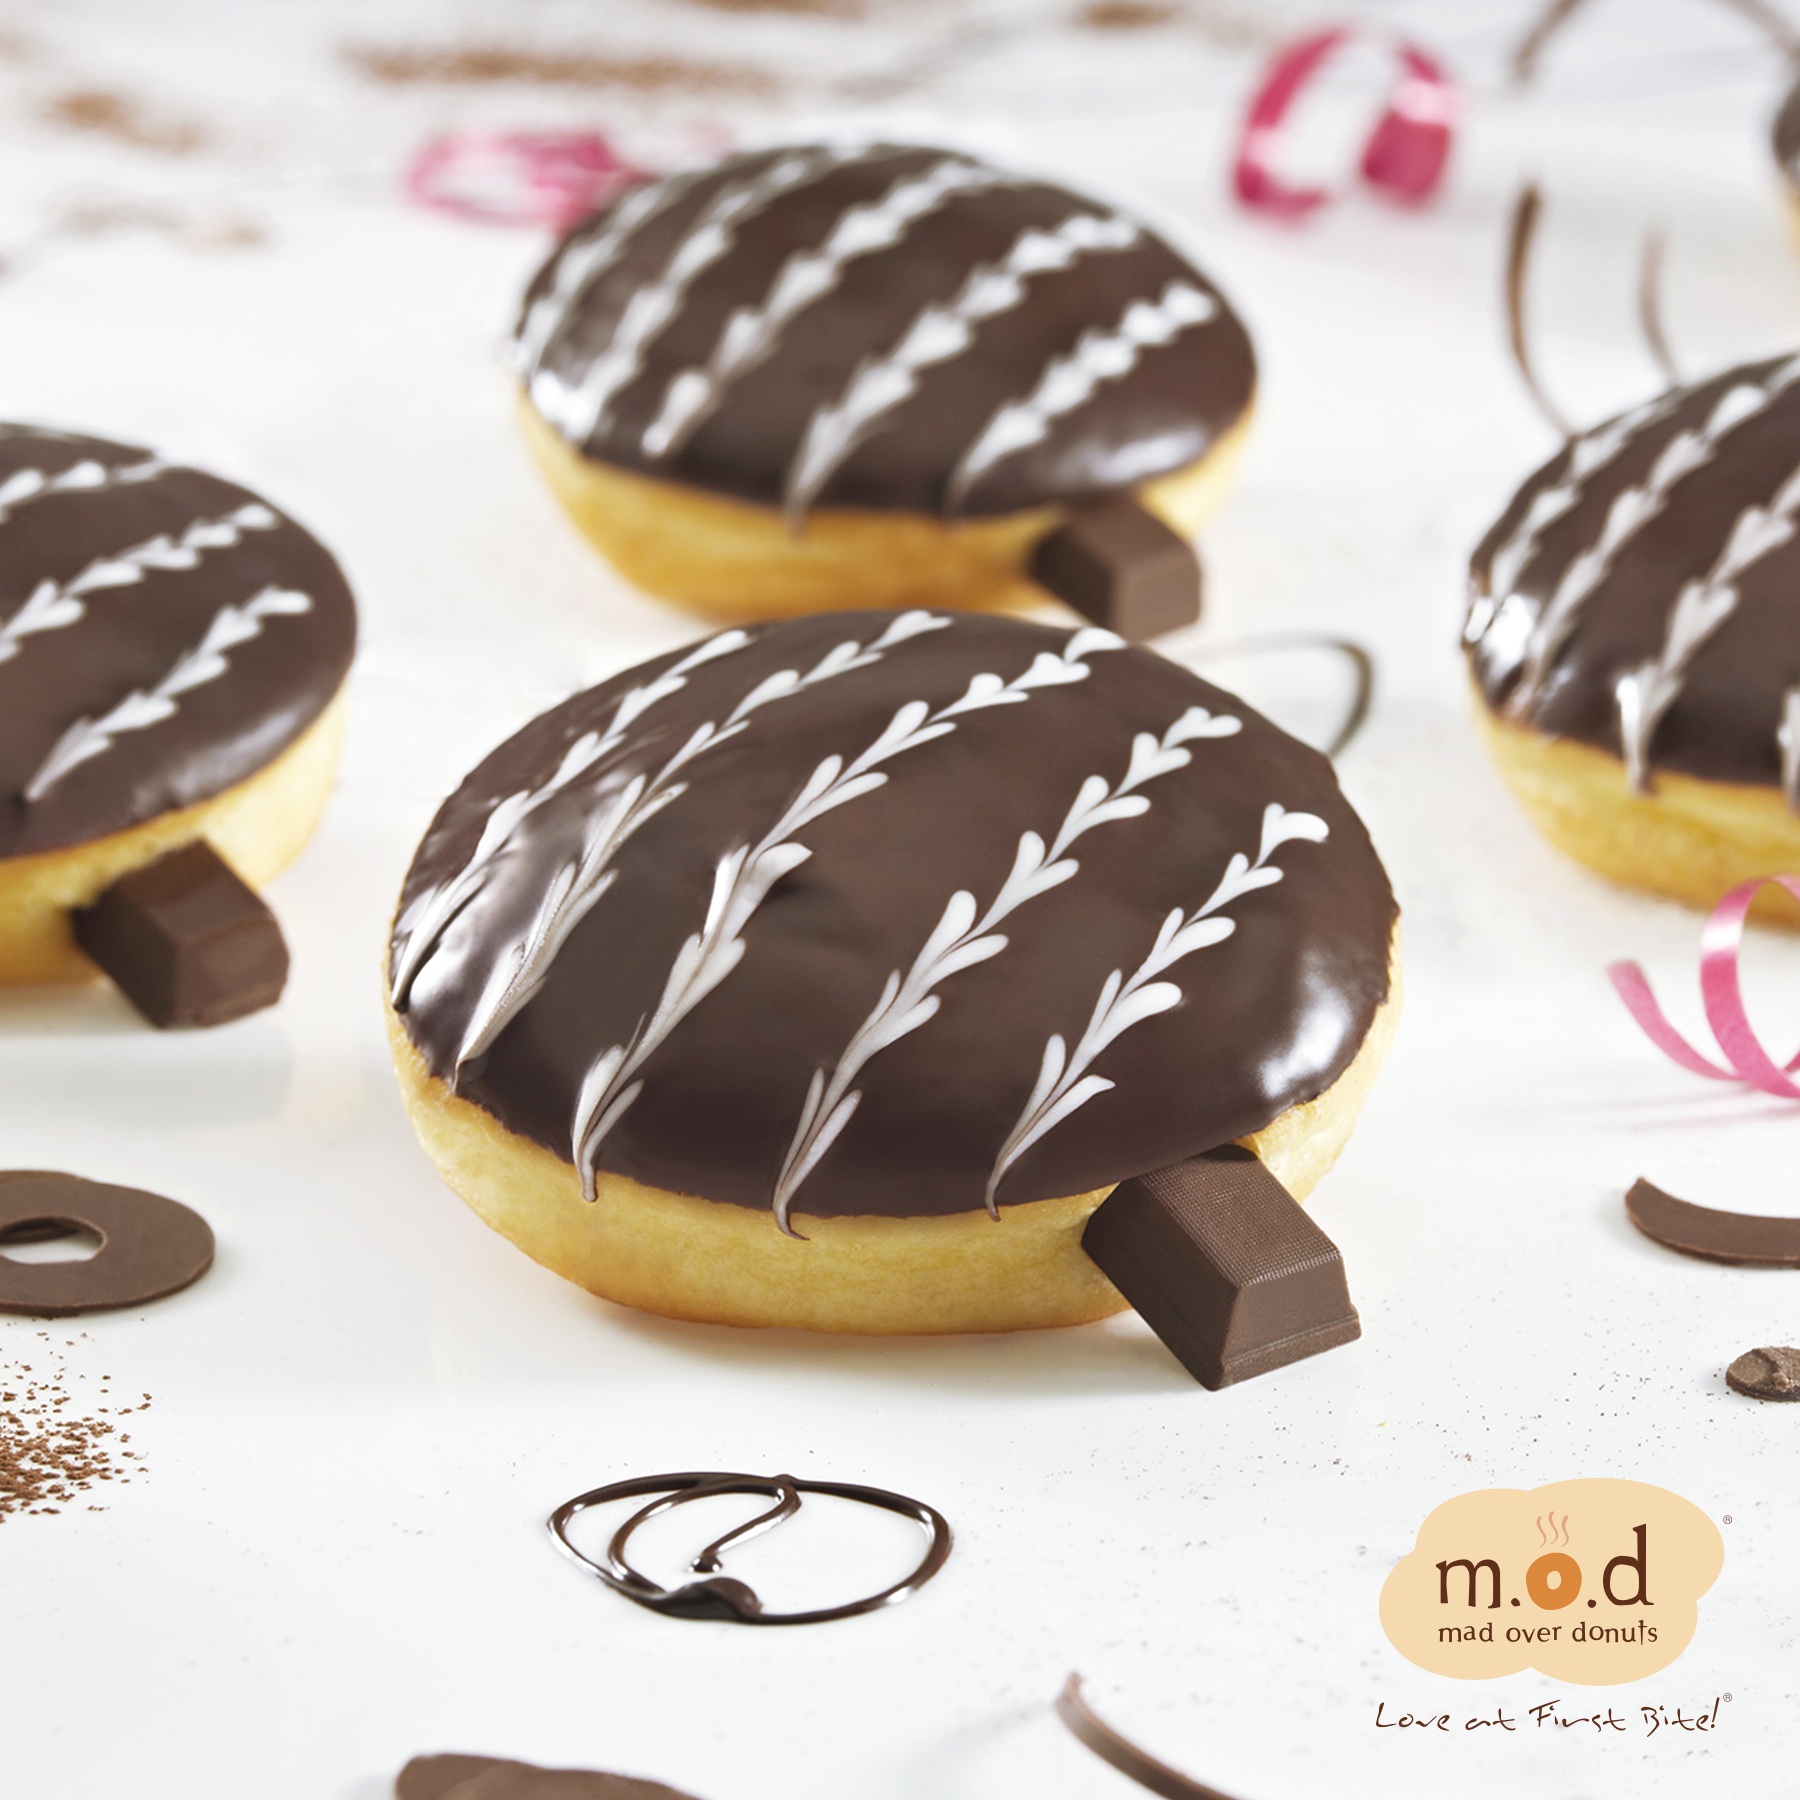 Krunch Kraze - infused with Kitkat by Mad Over Donuts